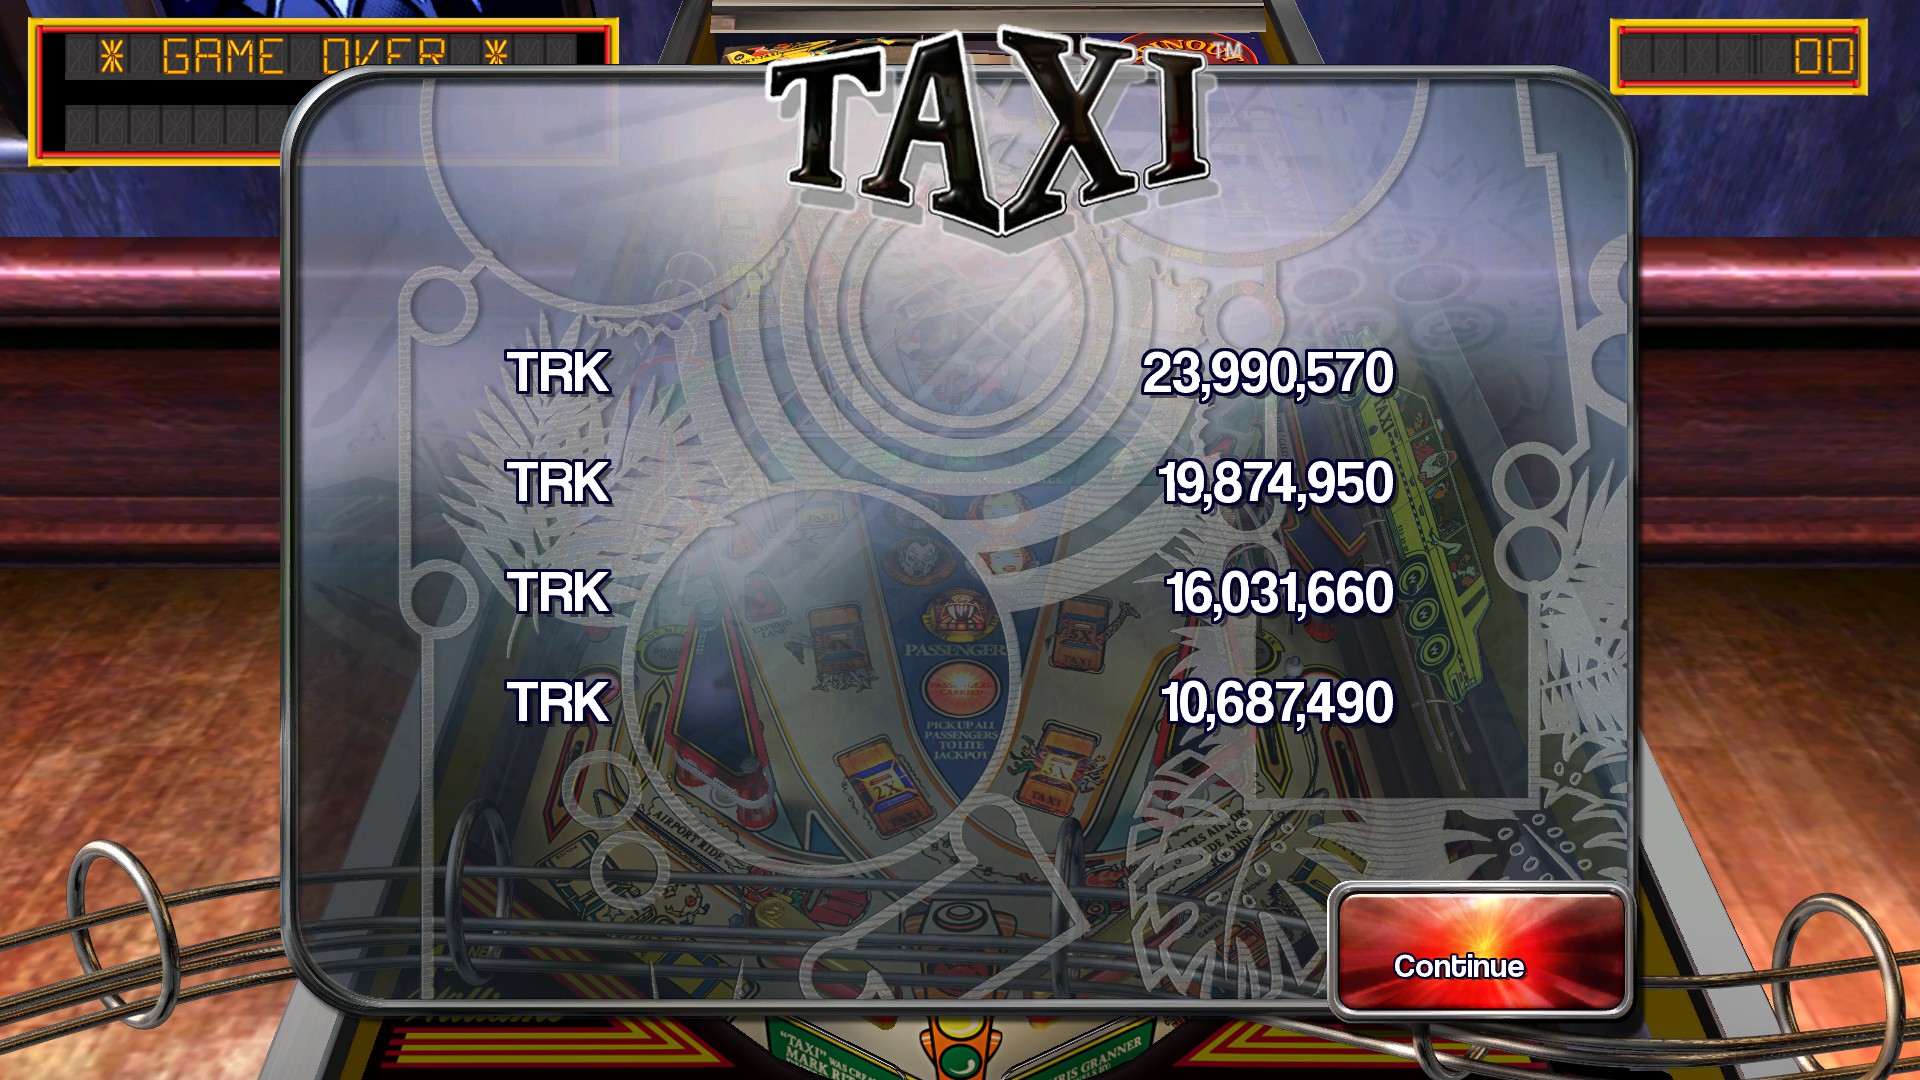 TheTrickster: Pinball Arcade: Taxi (PC) 23,990,570 points on 2016-03-02 06:36:13